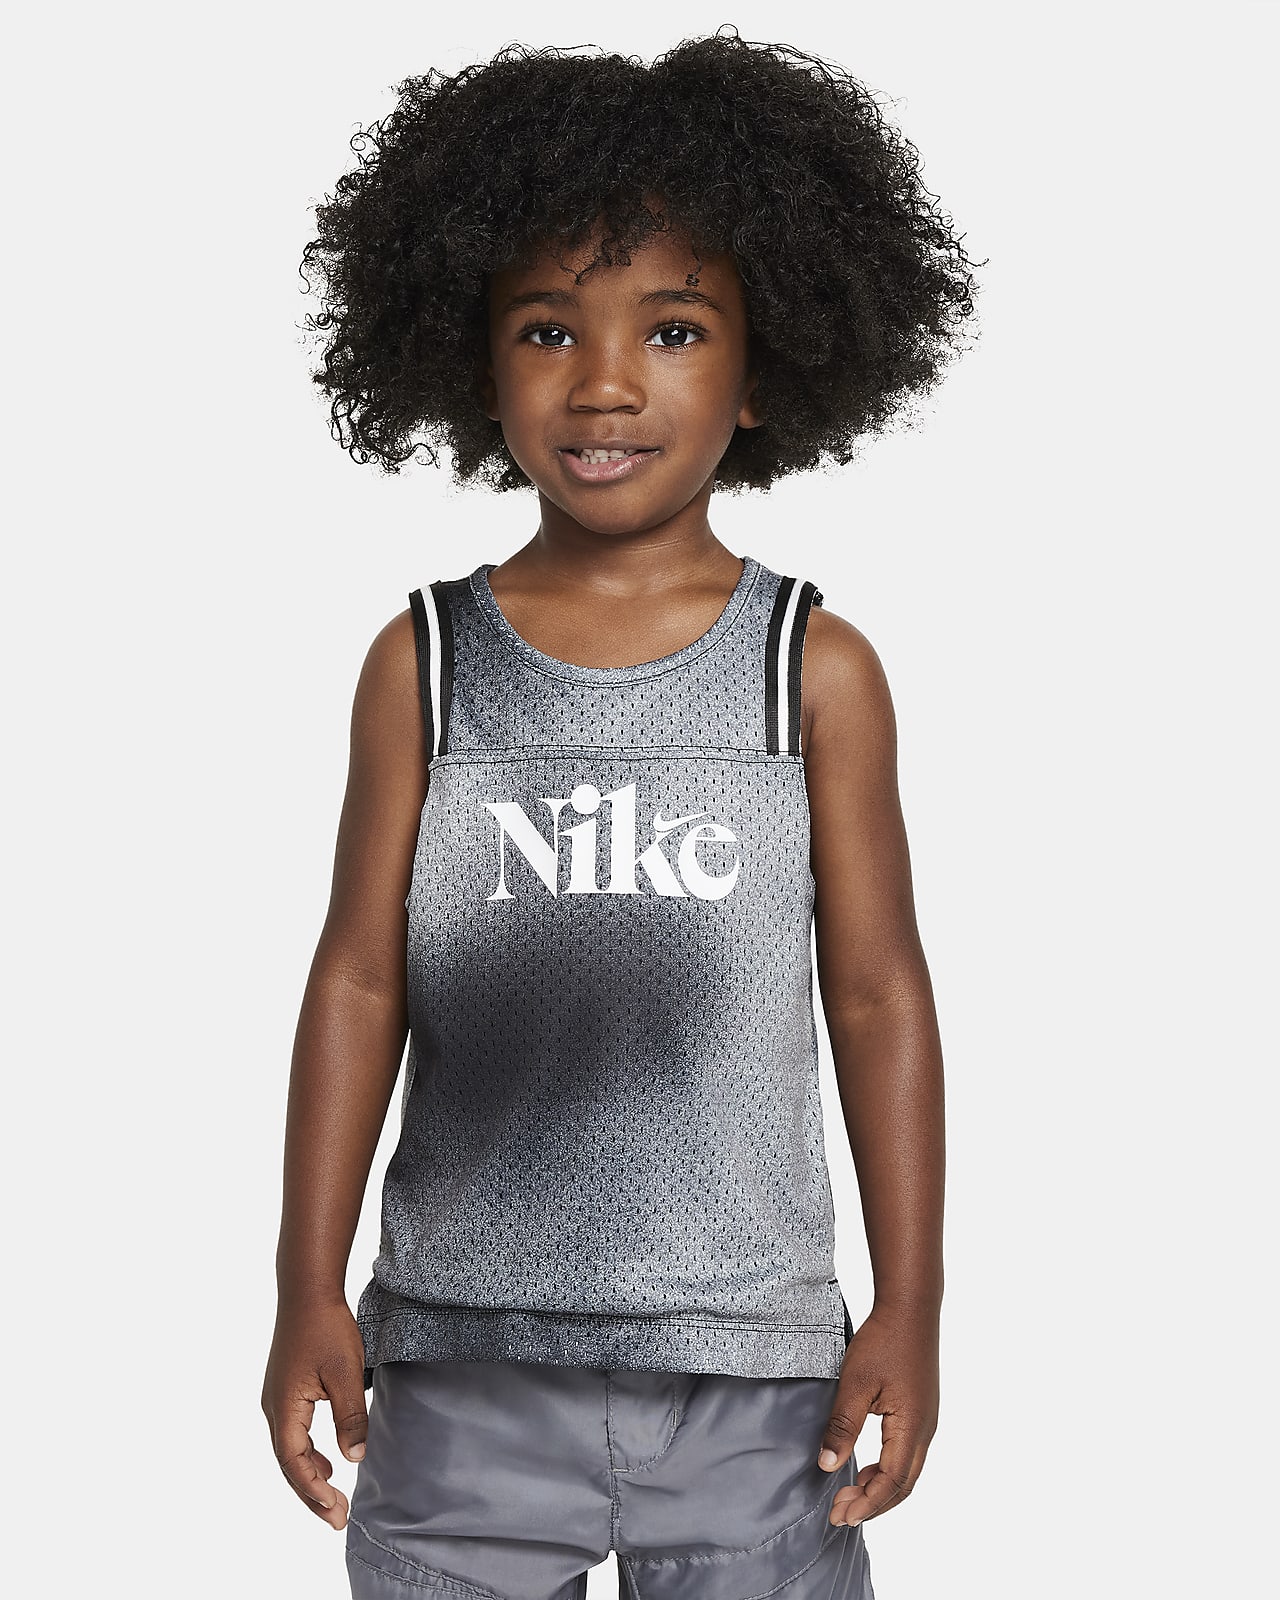 Nike Culture of Basketball Printed Pinnie Toddler Top